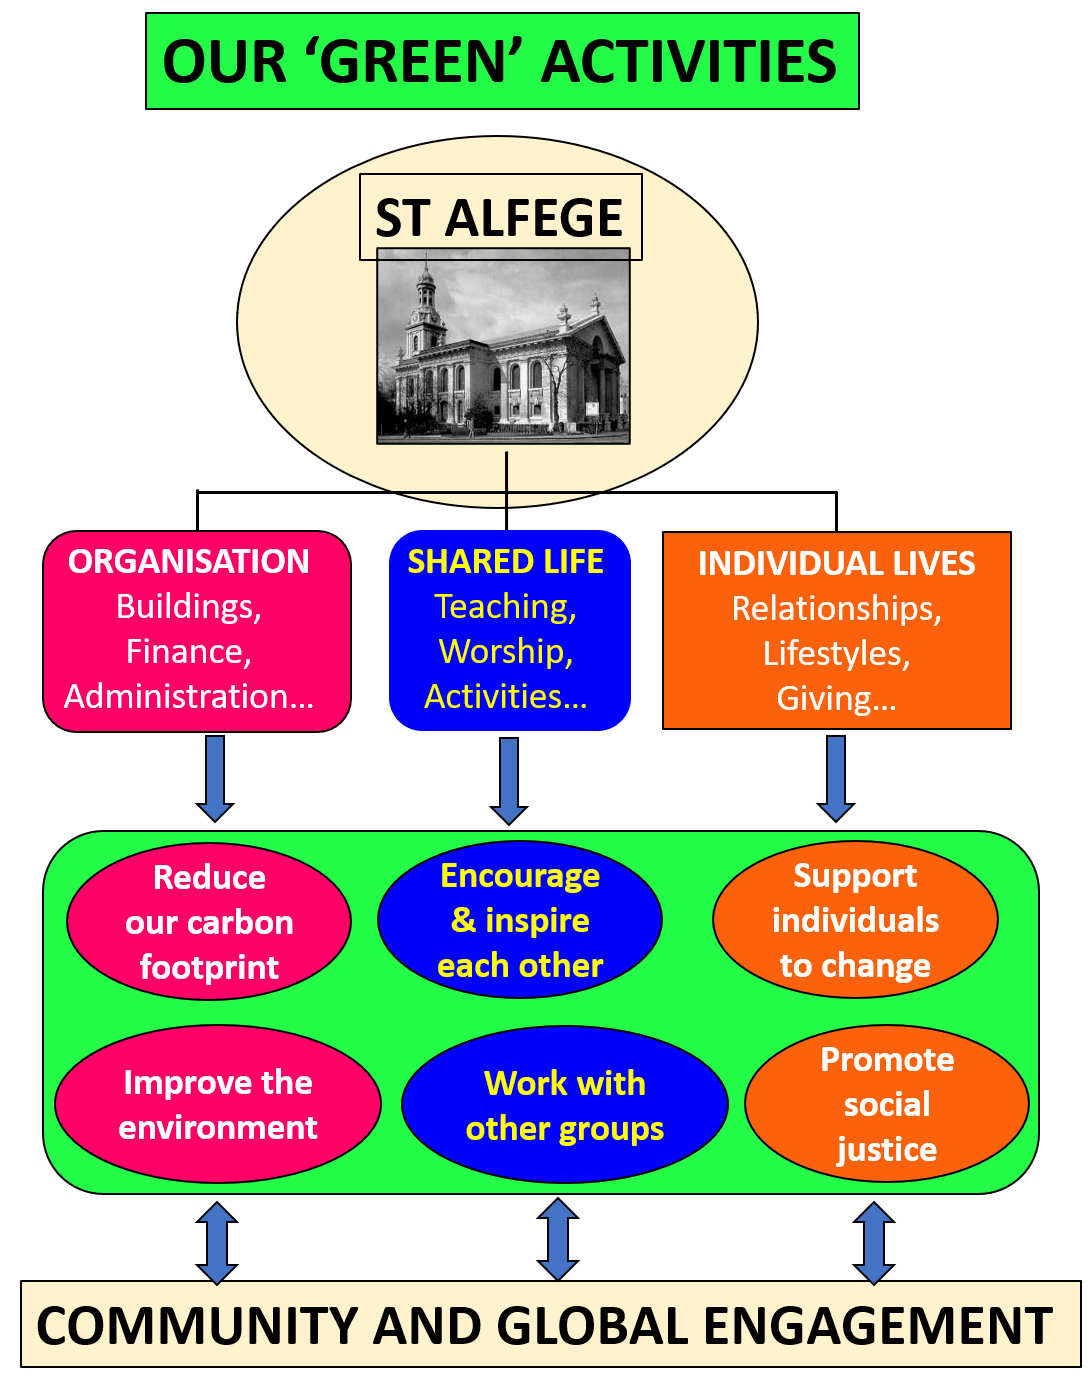 Overview of St Alfege green ac